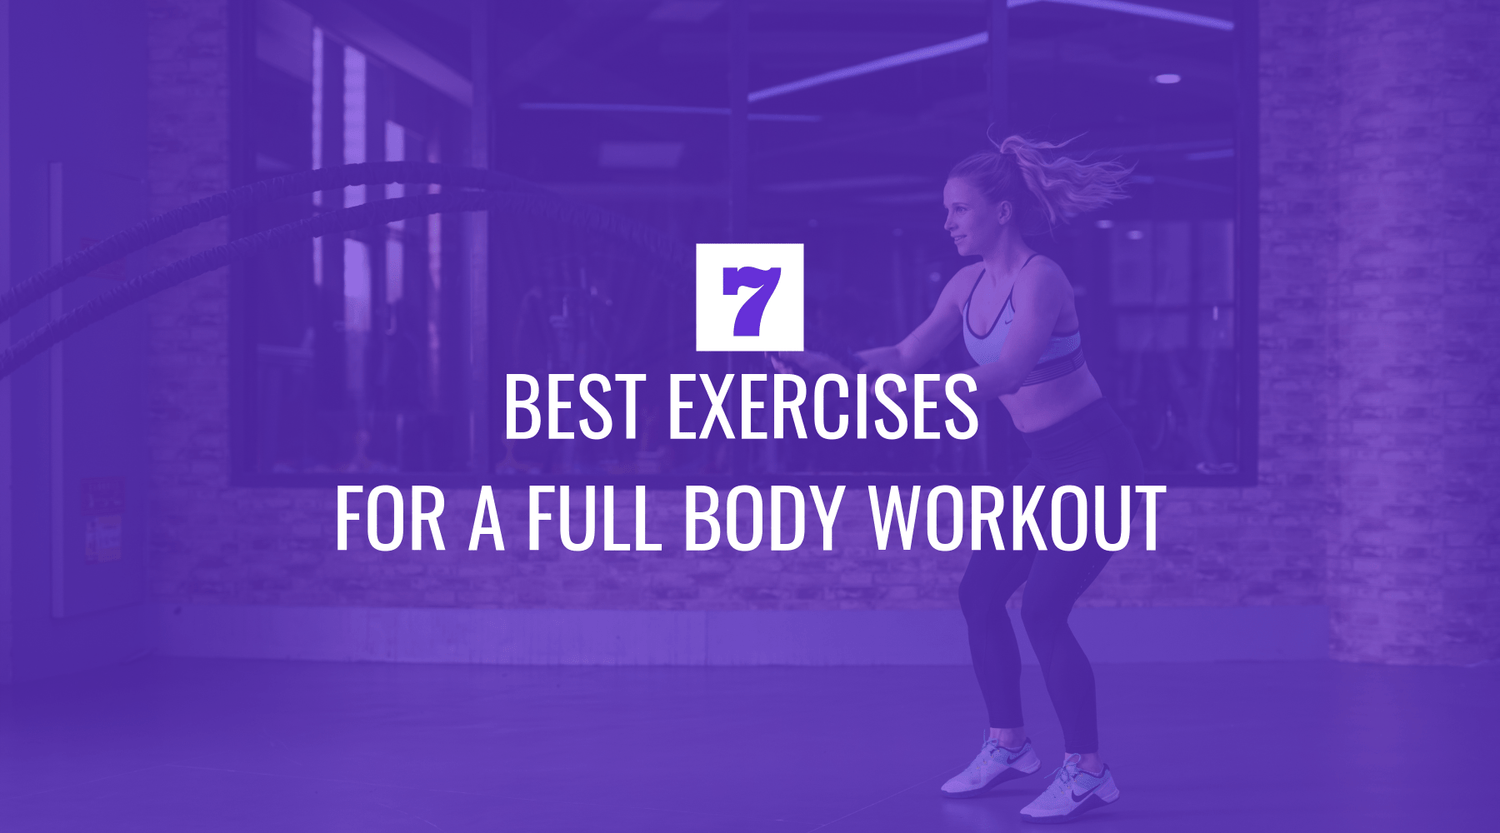 Seven of the Best Exercises for a Full Body Workout